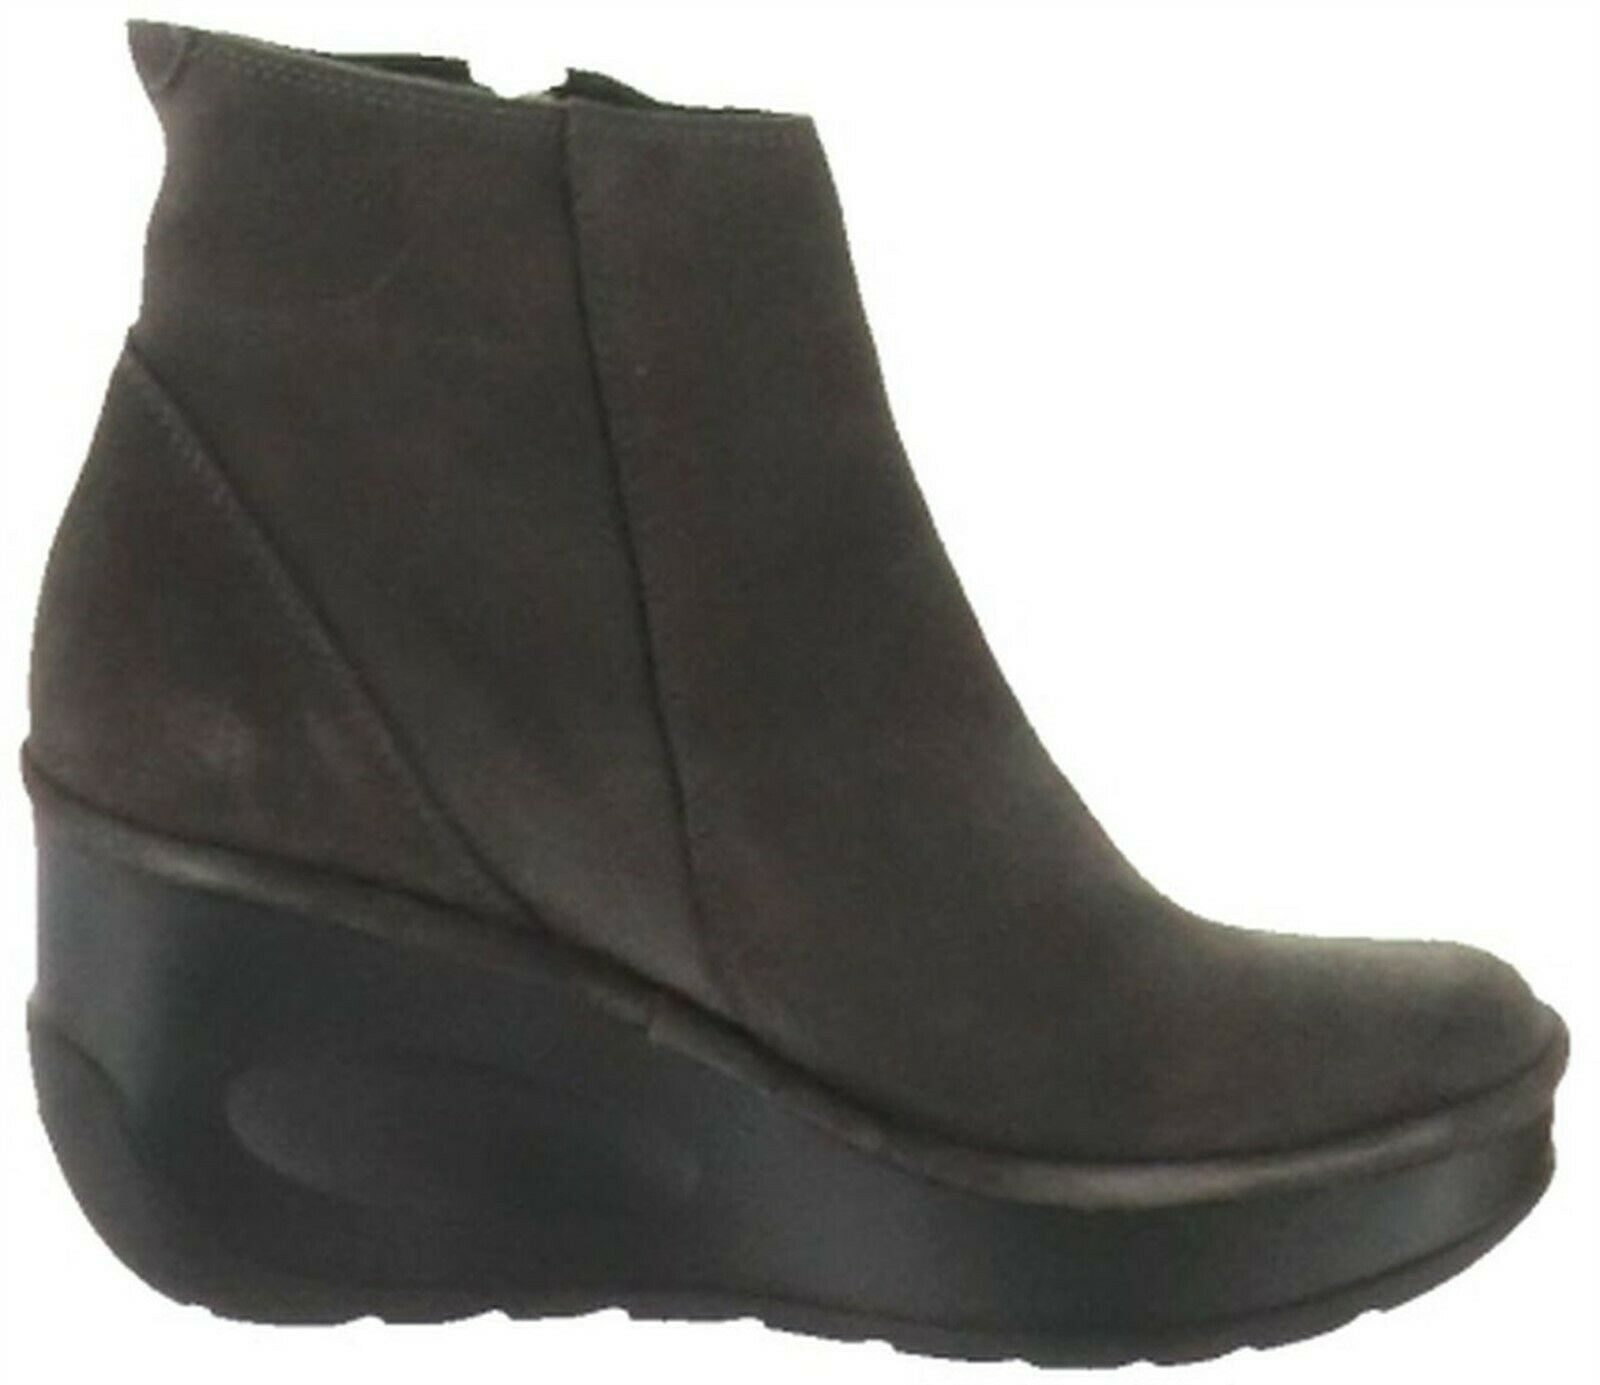 FLY London Leather Wedge Boots Jome 